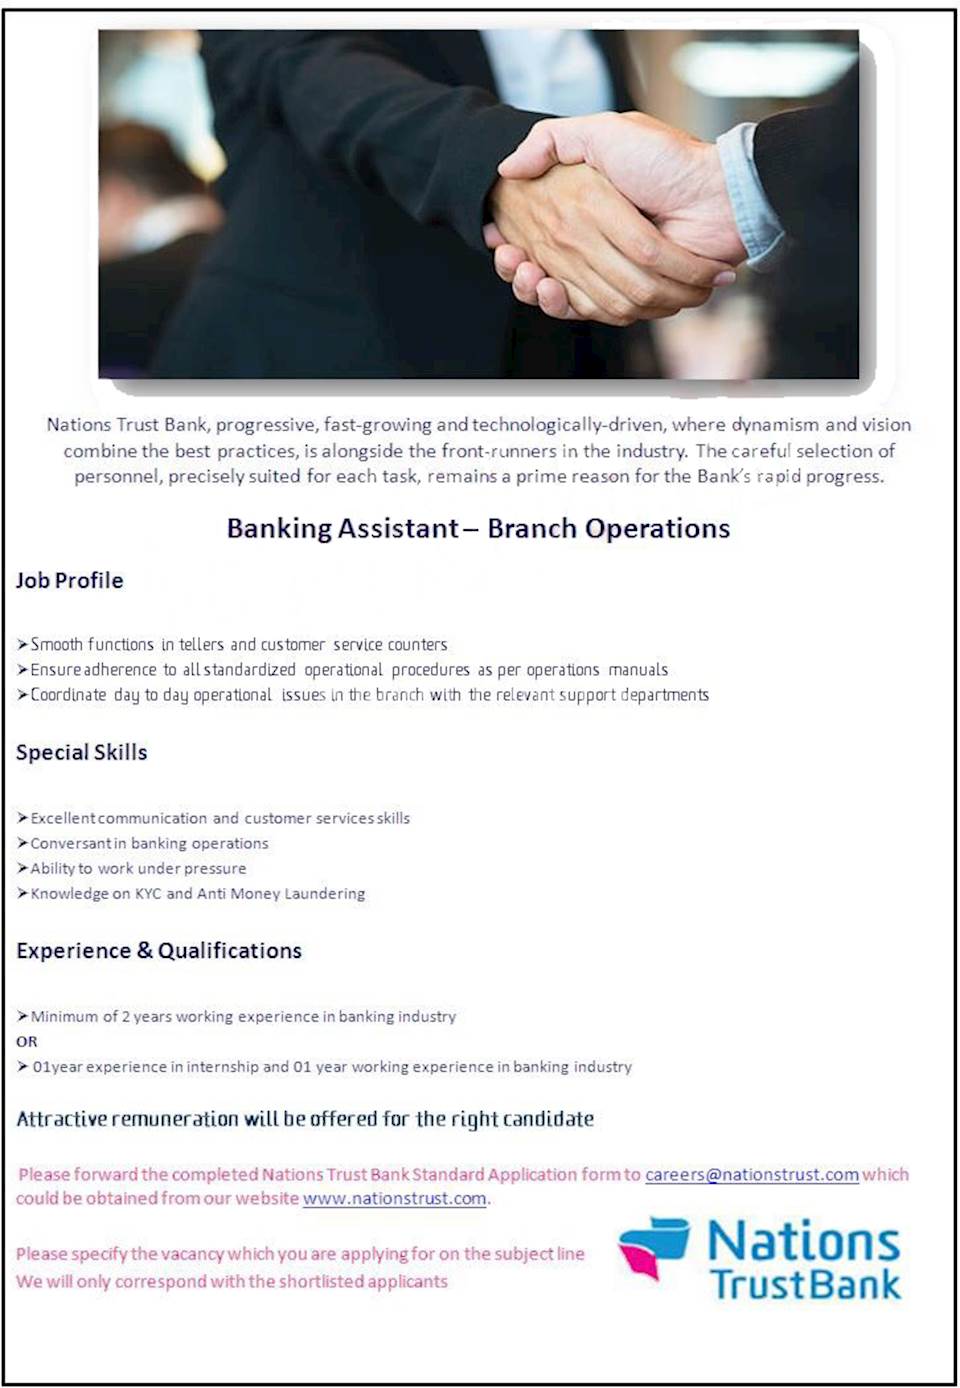 Banking Assistant - Branch Operations 